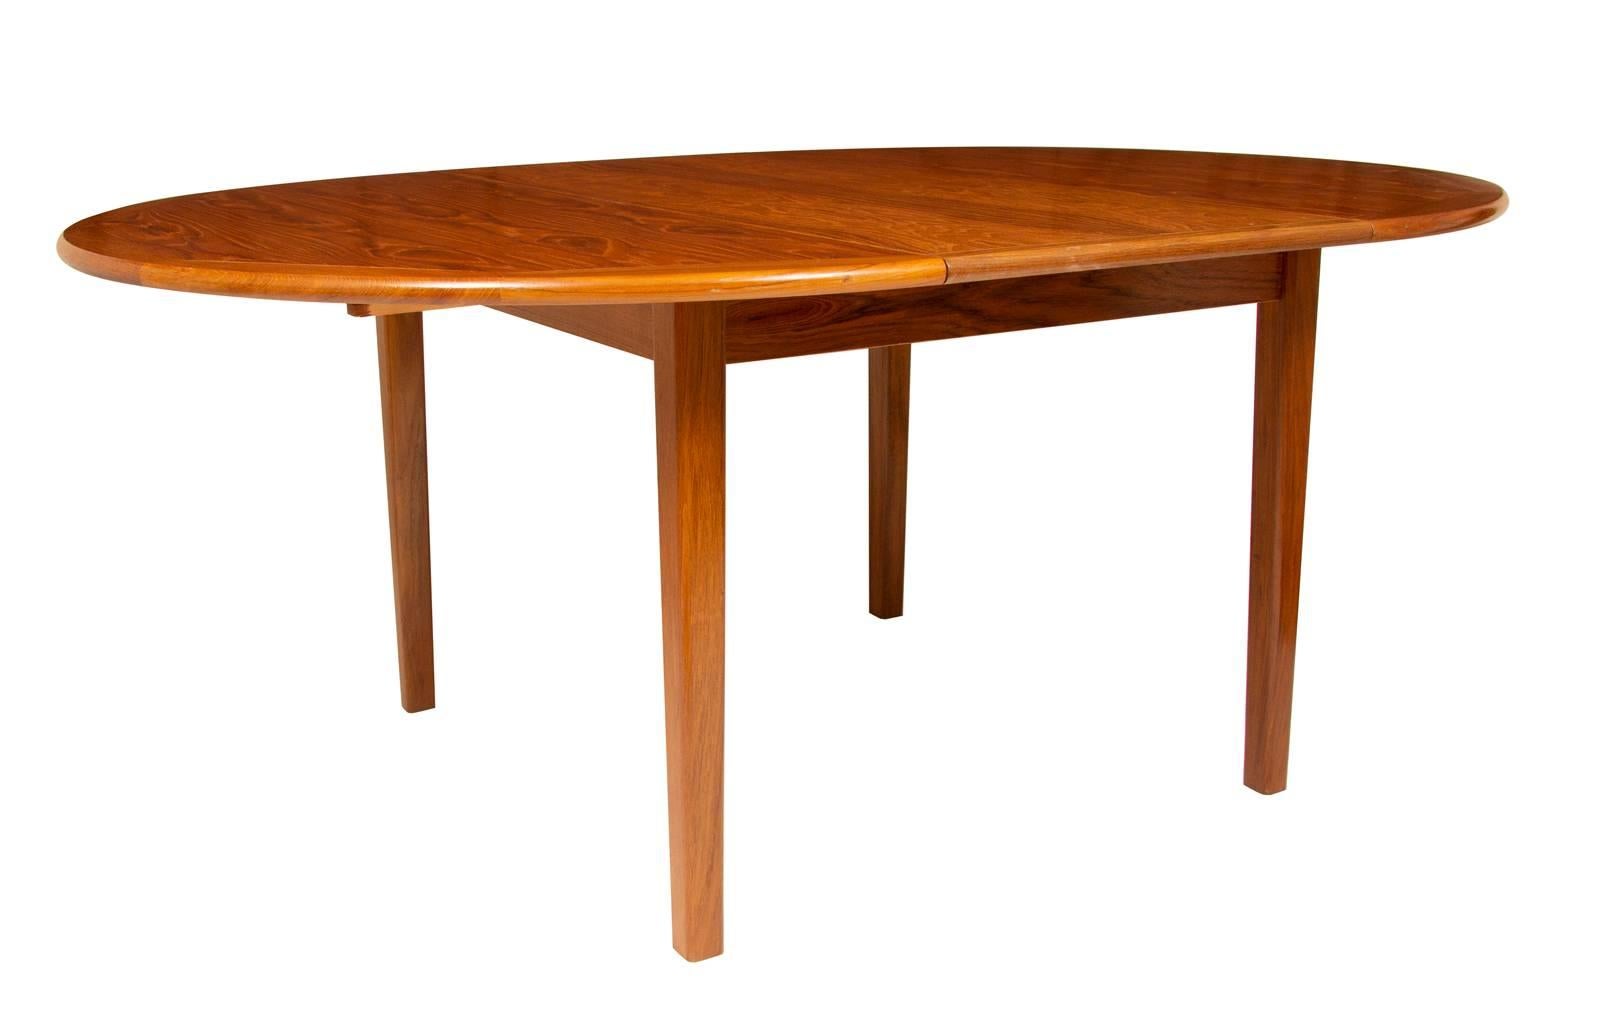 A beautiful teak dining table with four removable legs and one insert. Made in Denmark by Vejle Stole. The dining table can be extended to 180cms long with the additional insert. Very well made and solidly constructed the table has a striking